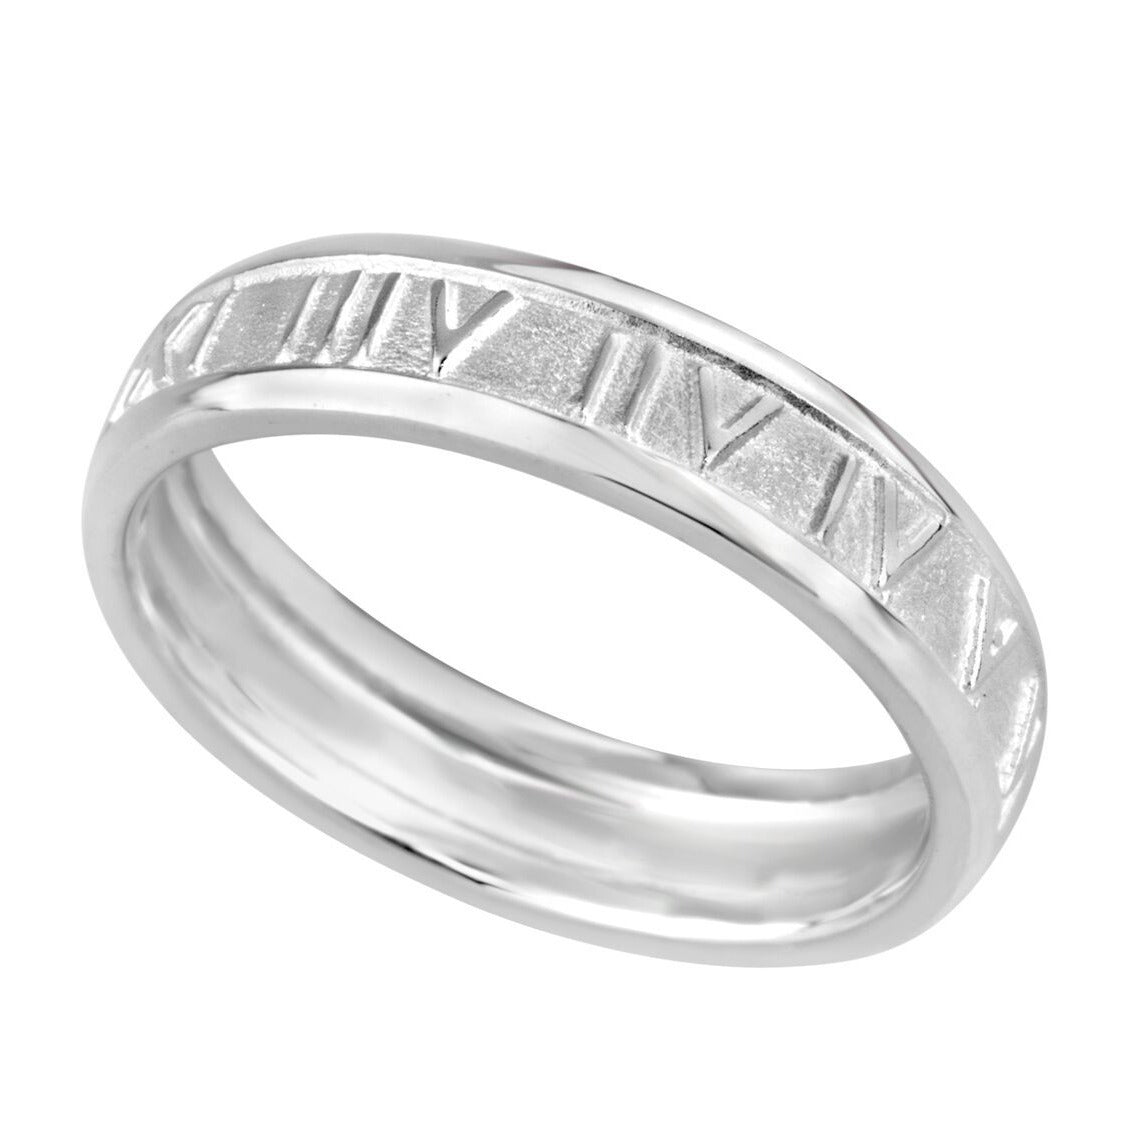 Gents Sterling Silver Roman Numeral Design Ring Q215 – H & S Jewellers